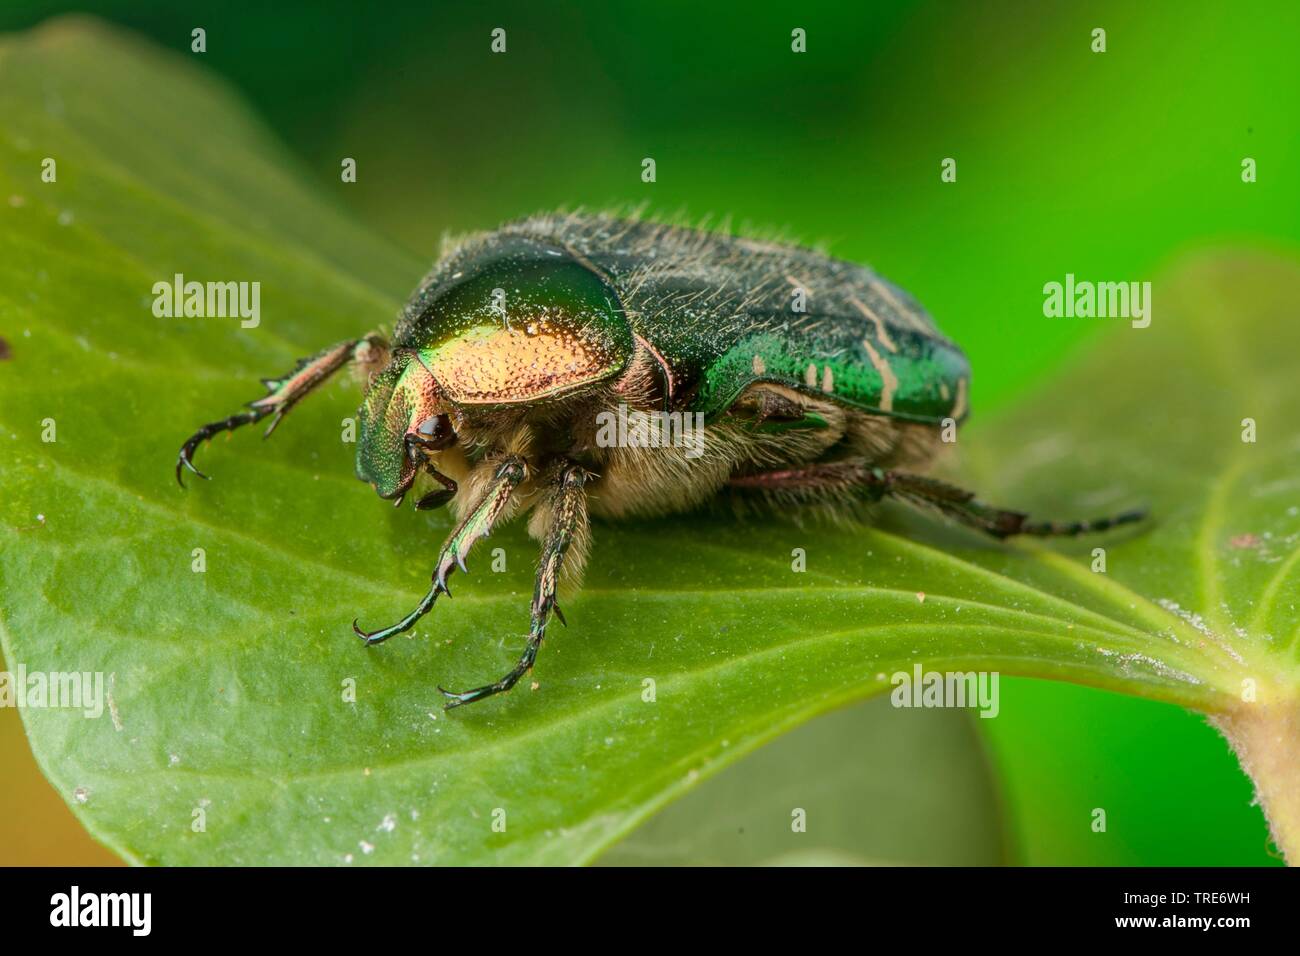 rose chafer (Cetonia aurata), on a leaf, Germany Stock Photo